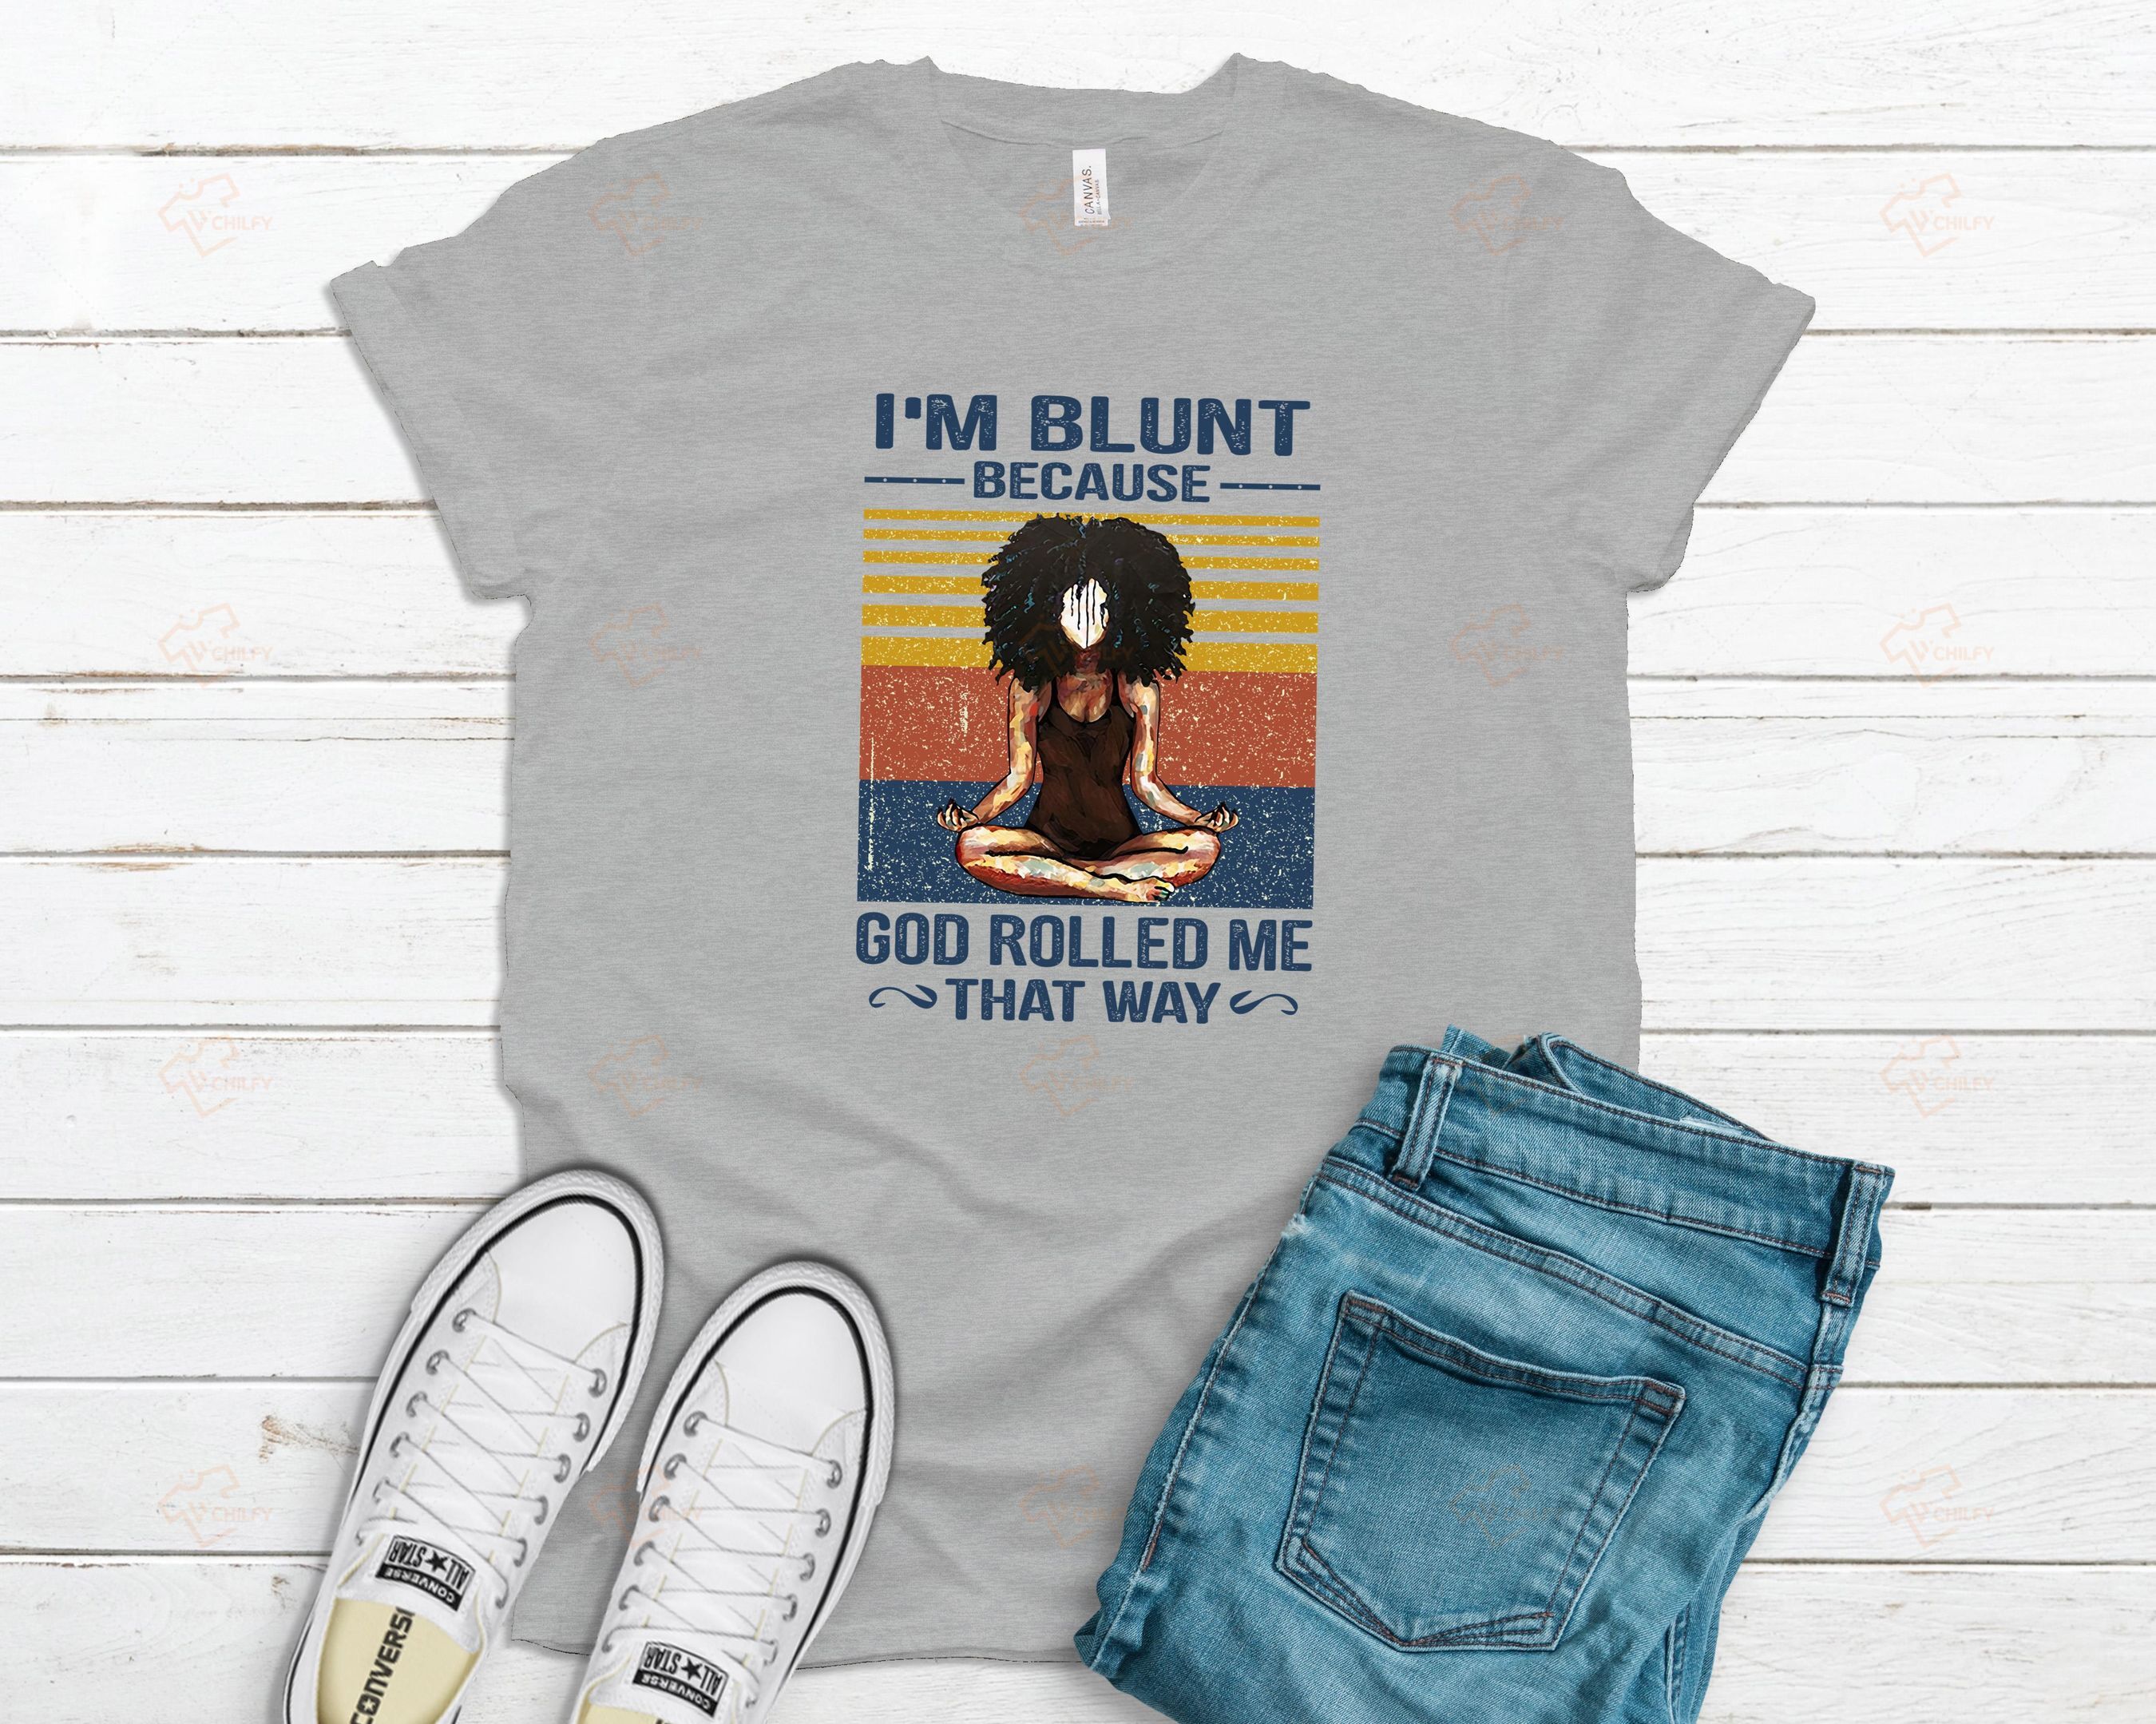 I’m blunt because god rolled me that way shirt, afro girl shirt